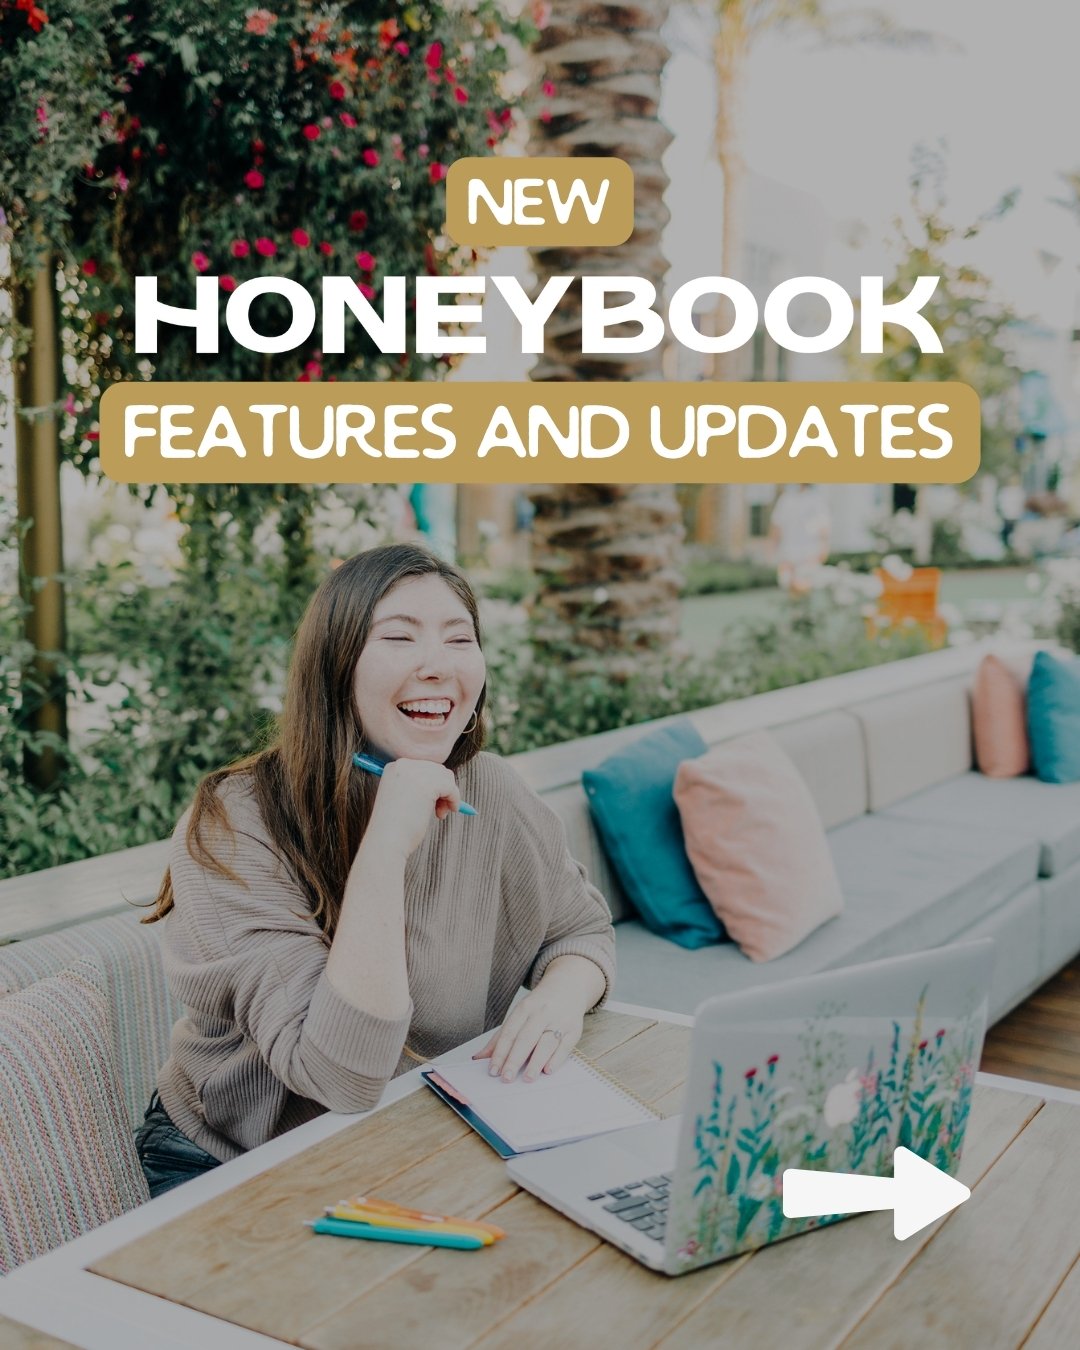 Are you ready for this?!

@honeybook recently announced some new and improved exciting updates!!

This includes&hellip;

🌼 AI composer for projects
🌼 Assign automated tasks to team members
🌼 Smart fields within a text block
🌼 Mark smart files as 